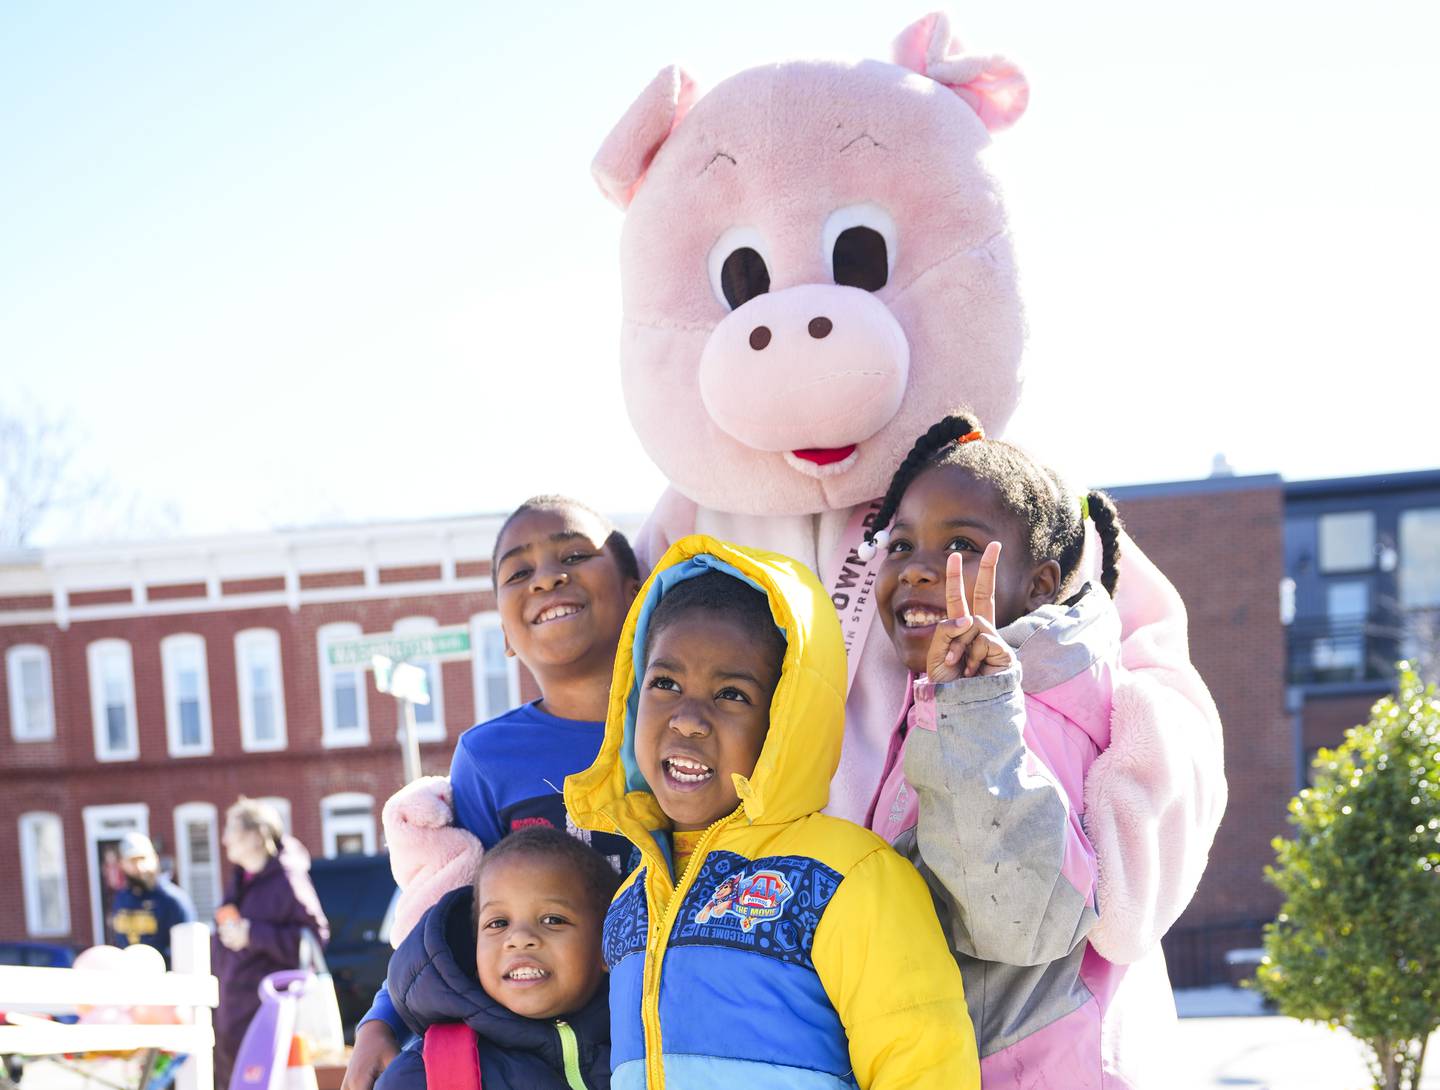 Pigtown mascot, Piggleton, takes a picture with (right to left) Amani Thompson (7), Judah Thompson (4), Titus Thompson (8), Simeon Thompson (2) during the 3rd annual Pigtown neighborhood celebration of National Pig Day, in Washington Village, March 4, 2023.